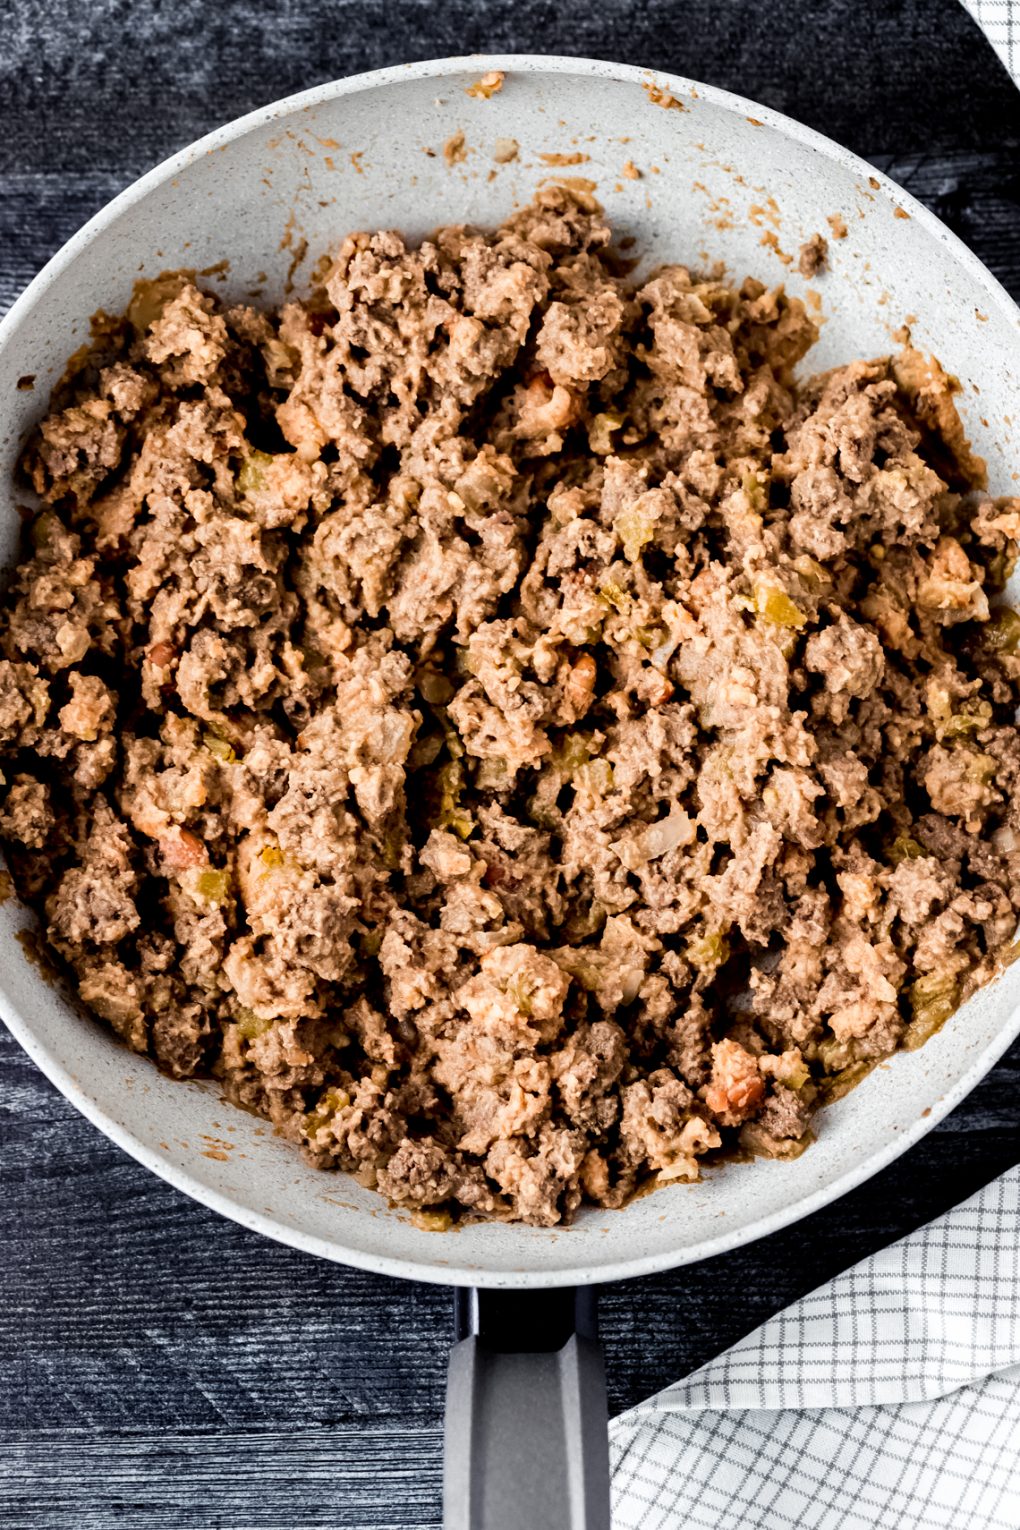 ground elk meat combined with refried beans in a skillet